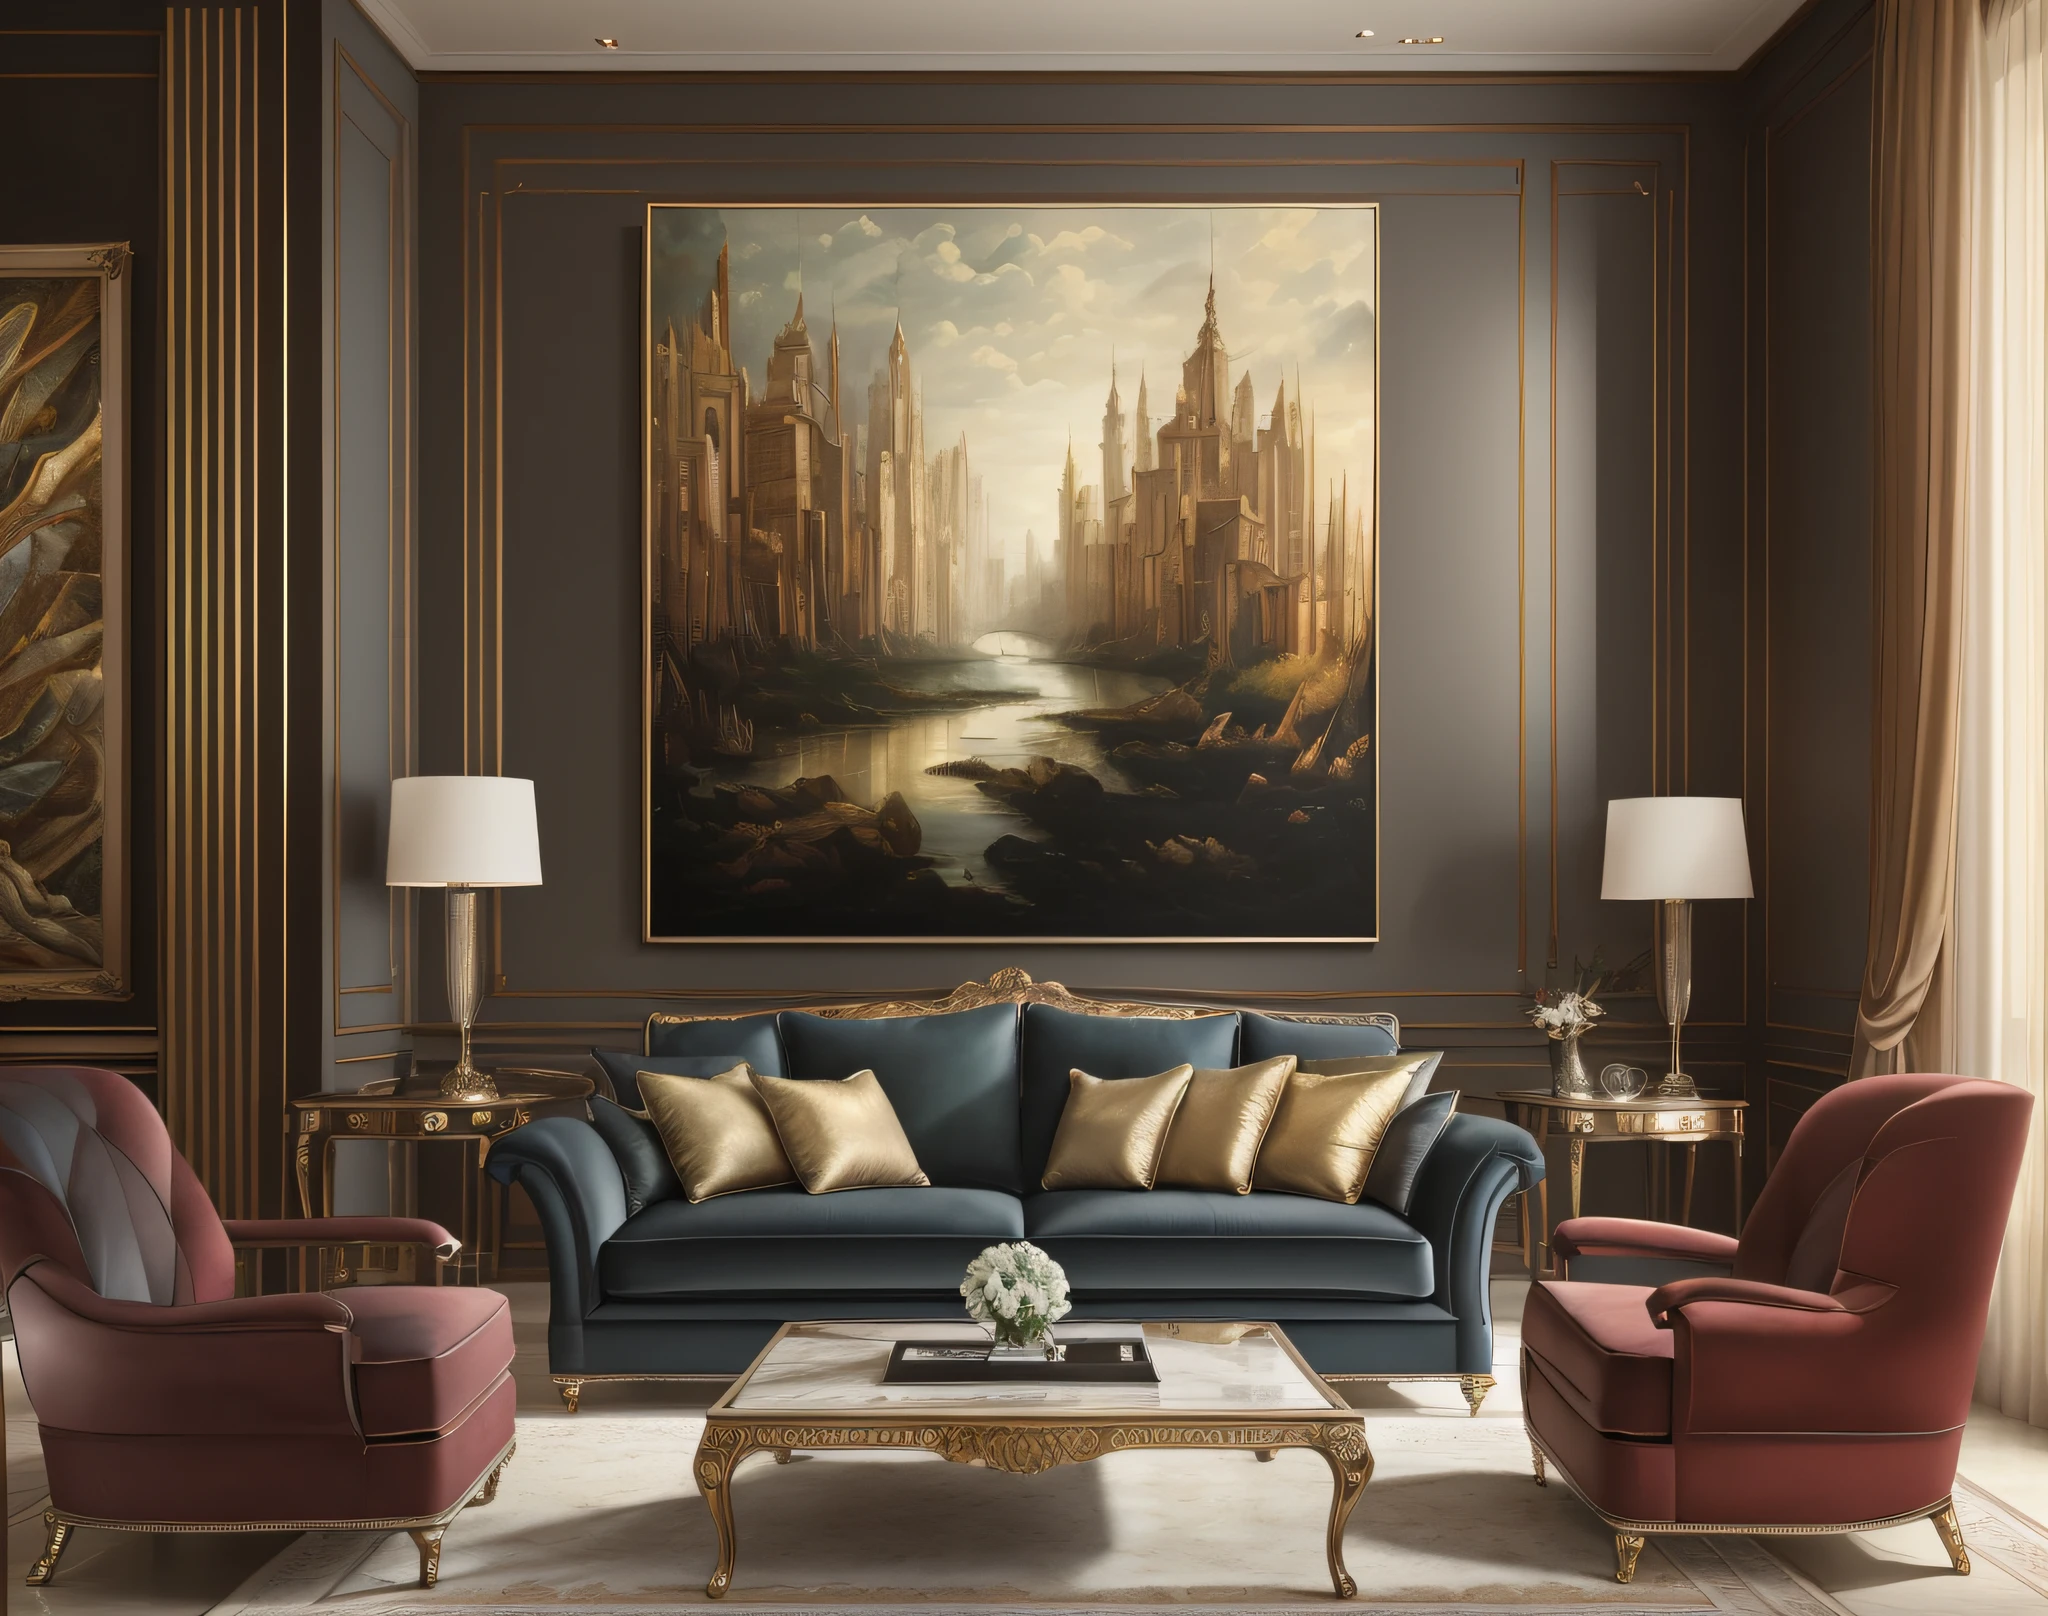 ((best quality)), ((masterpiece)), (detailed), interior decoration, elegant living room, emphasis on the wall with a prominent large-scale horizontal artwork, (realistic:1.1), (spacious layout:1.2), (timeless aesthetics:1.1), (luxurious ambiance:1.2), (refined craftsmanship:1.1), (sophisticated color palette:1.1), grand dimensions, (eye-catching presentation:1.2), (captivating details:1.1), (comfortable seating:1.1), (harmonious arrangement:1.2), (artistic focal point:1.1), (oversized artwork:1.1)